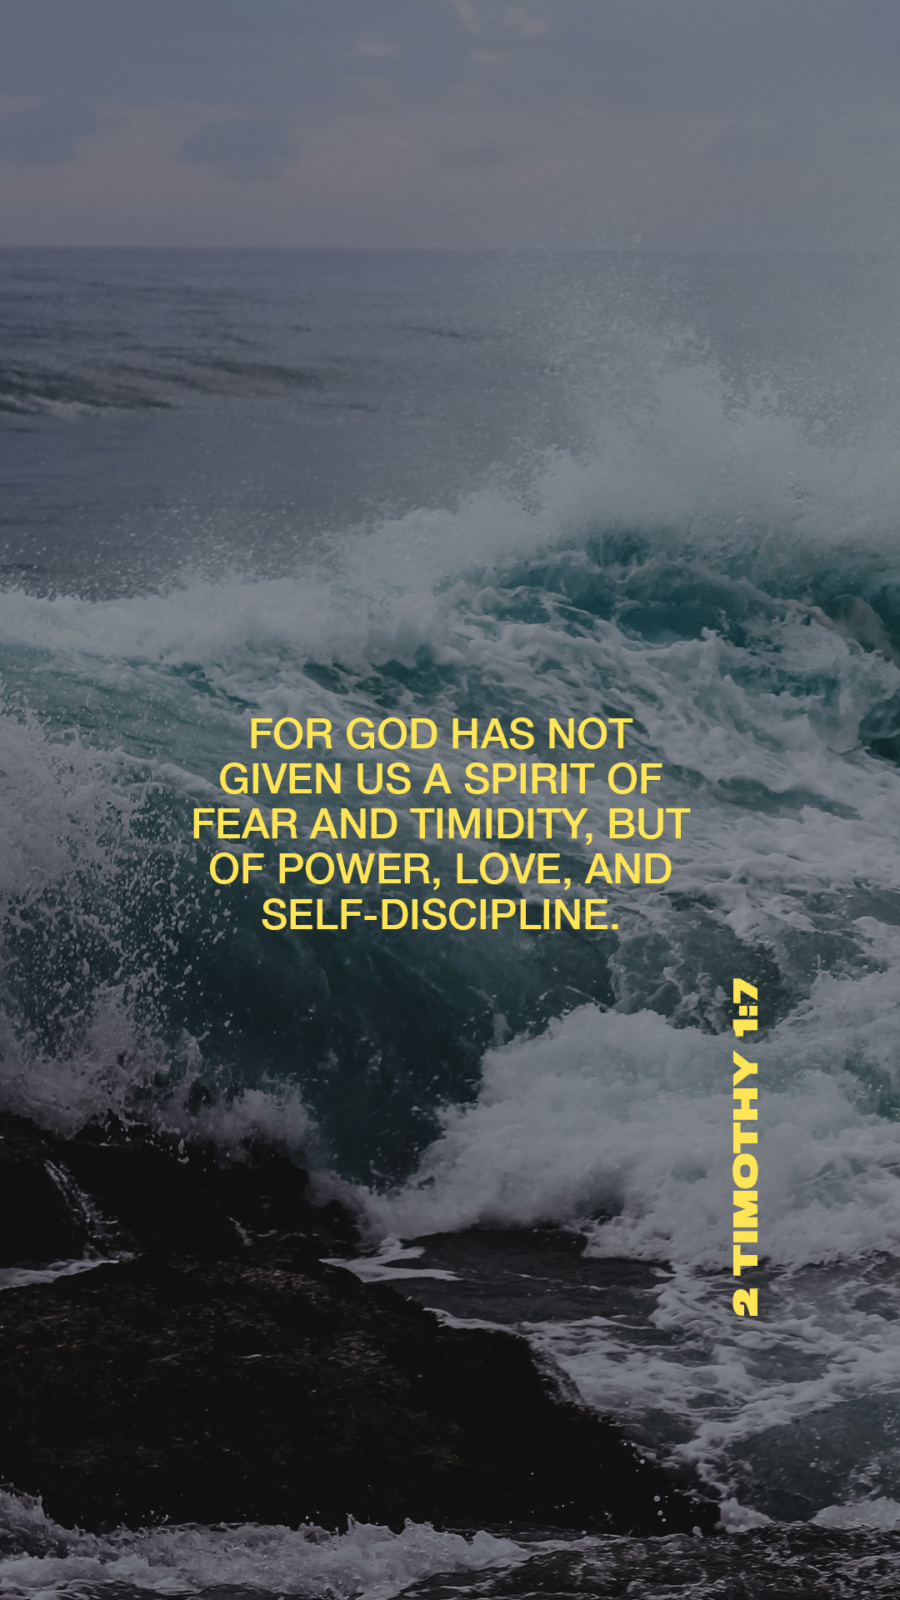 “For God has not given us a spirit of fear and timidity, but of power, love, and self-discipline.” (2 Timothy 1:7)